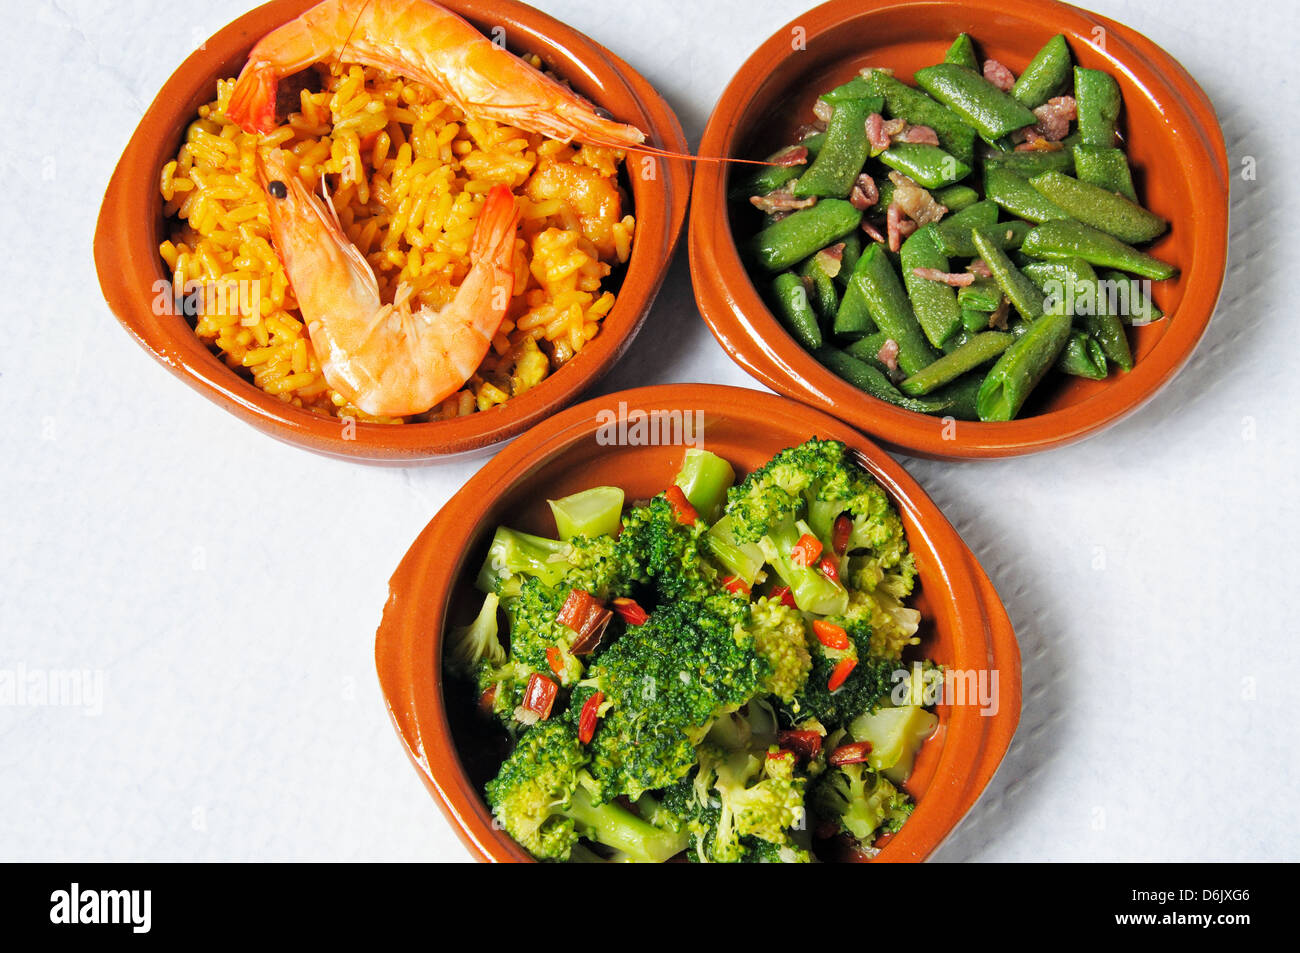 Tapas - Seafood and pork paella, broccoli with chilli and garlic, green beans with bacon. Stock Photo